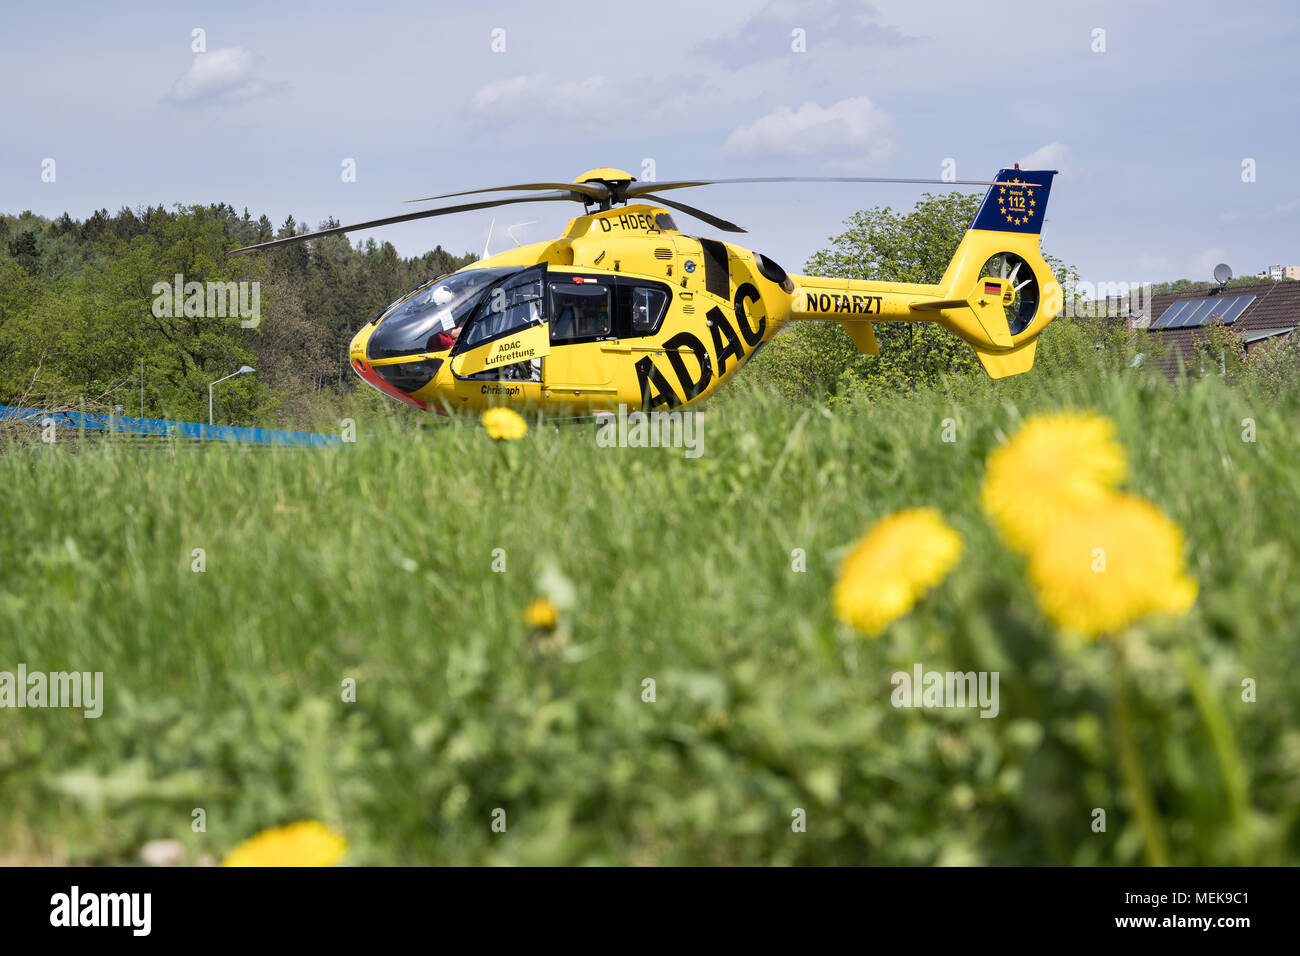 ADAC Luftrettung rescue helicopter D-HDEC of type Eurocopter EC-135 P2. Stock Photo